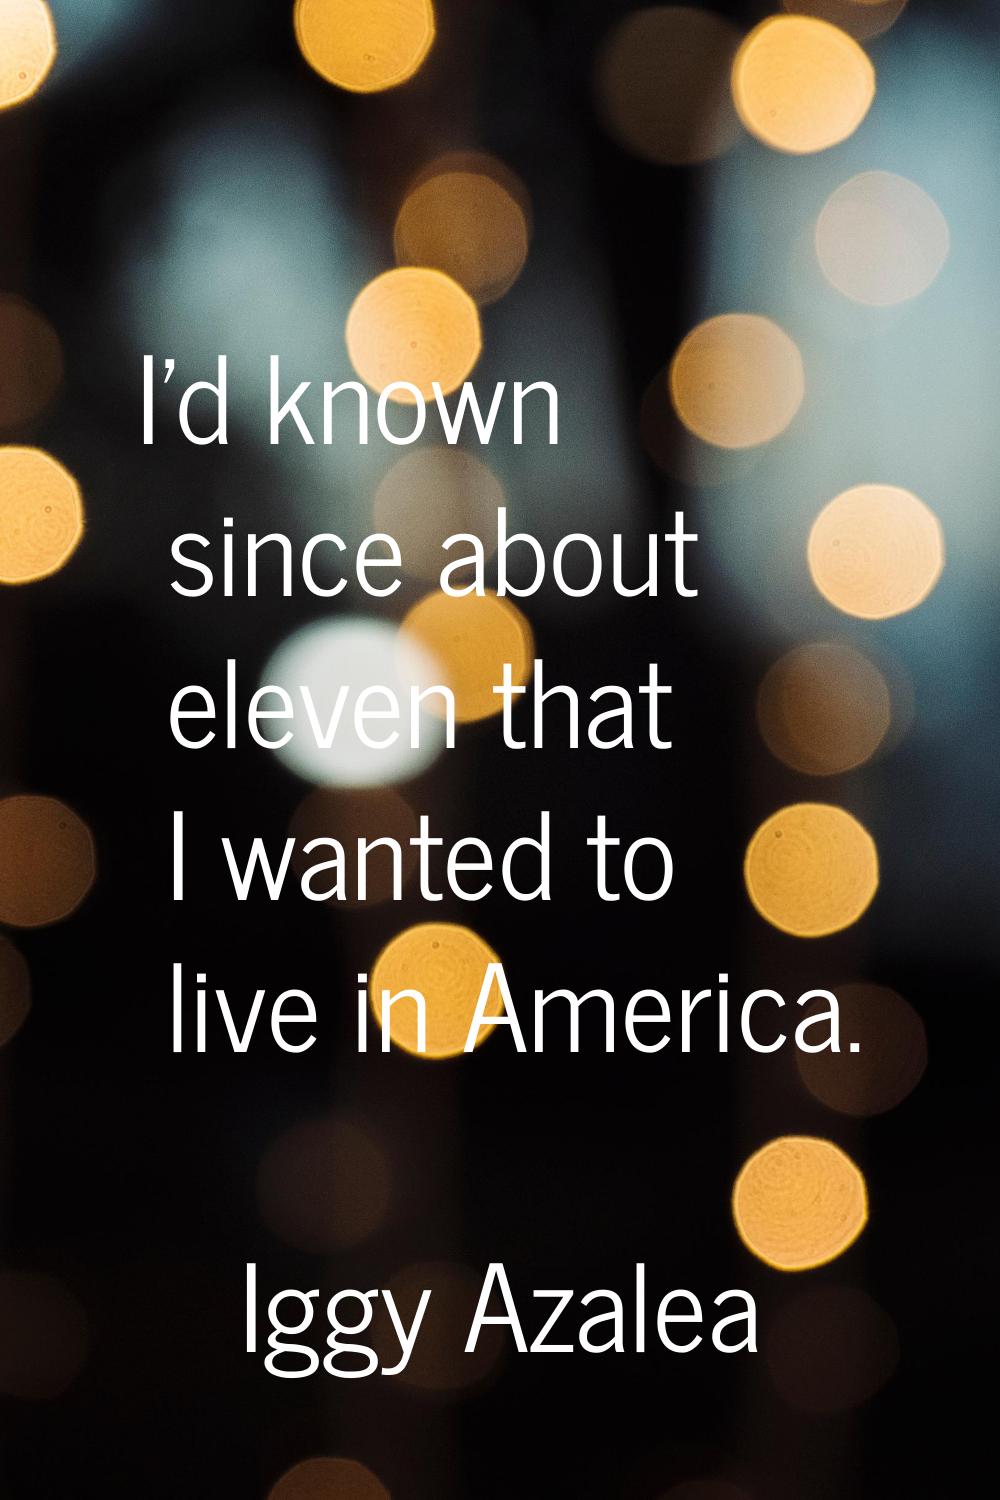 I'd known since about eleven that I wanted to live in America.